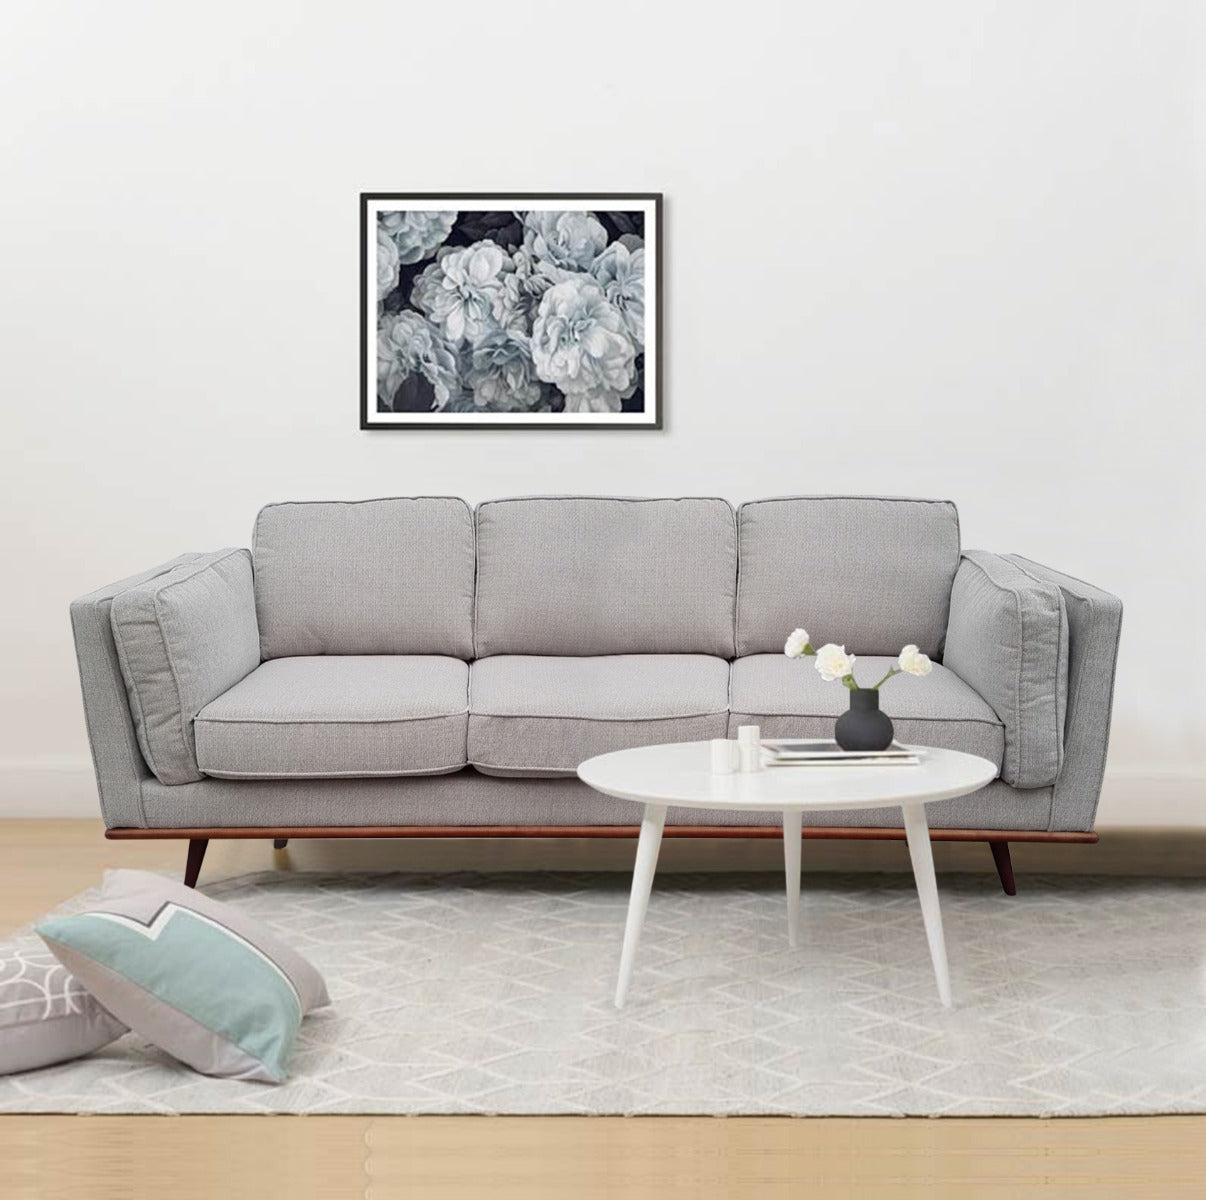 3 Seater Sofa Beige Fabric Modern Lounge Set for Living Room Couch with Wooden Frame - image1